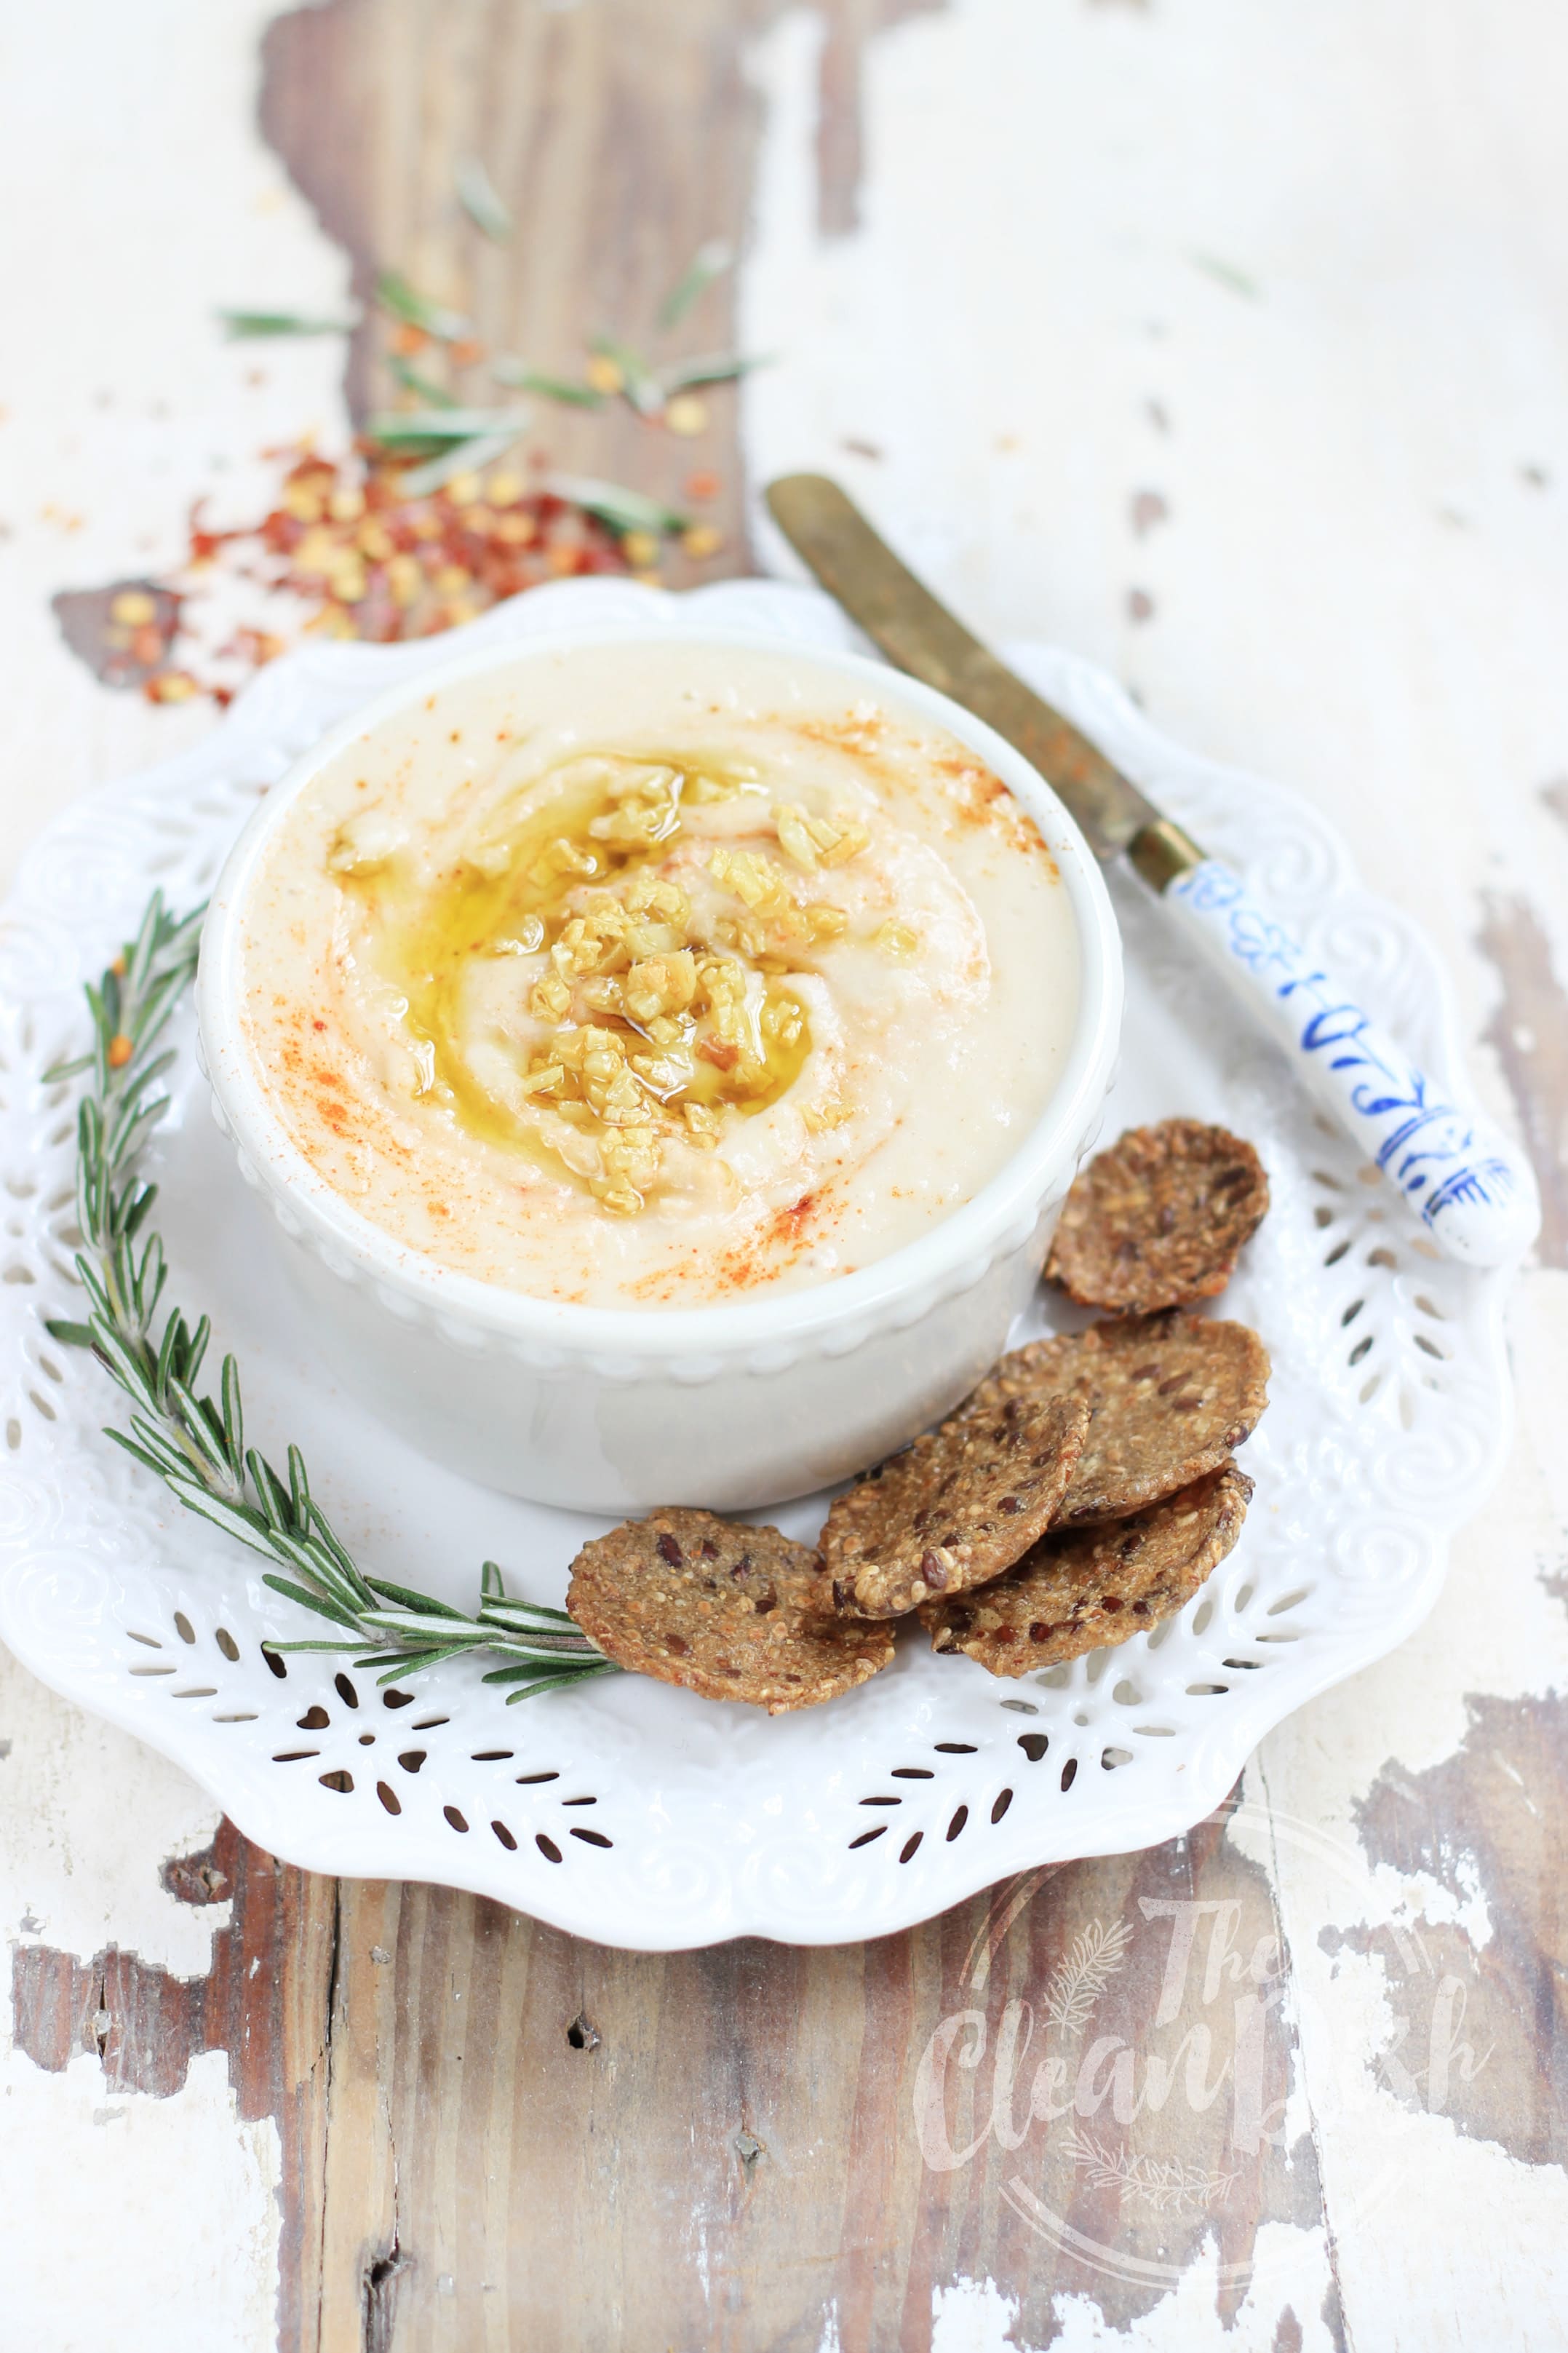 Roasted Garlic White Bean Dip from The Clean Dish